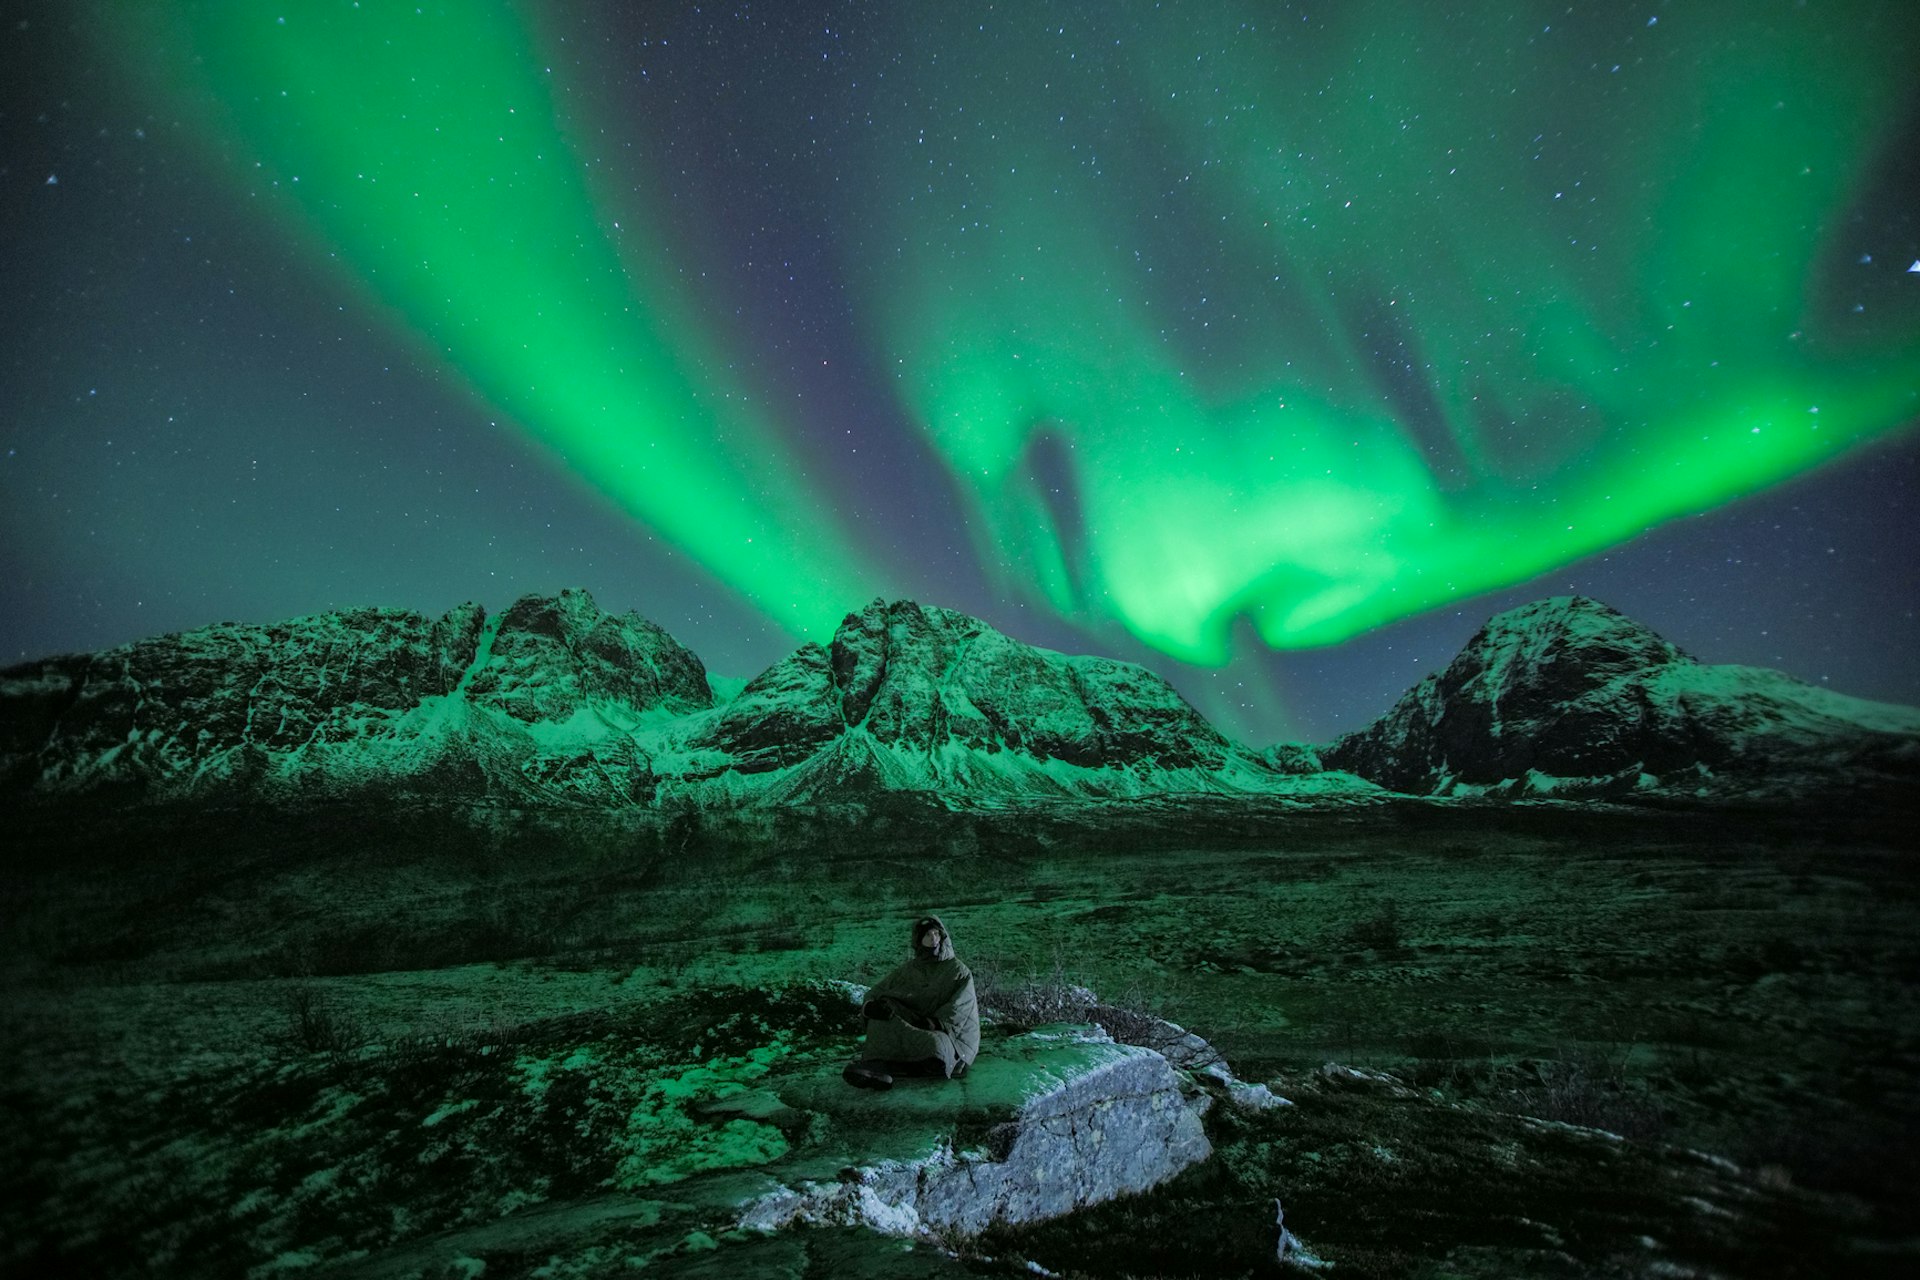 A person sits on a rock in the dark wilderness, looking up at the ethereal green glow of the Northern Lights.